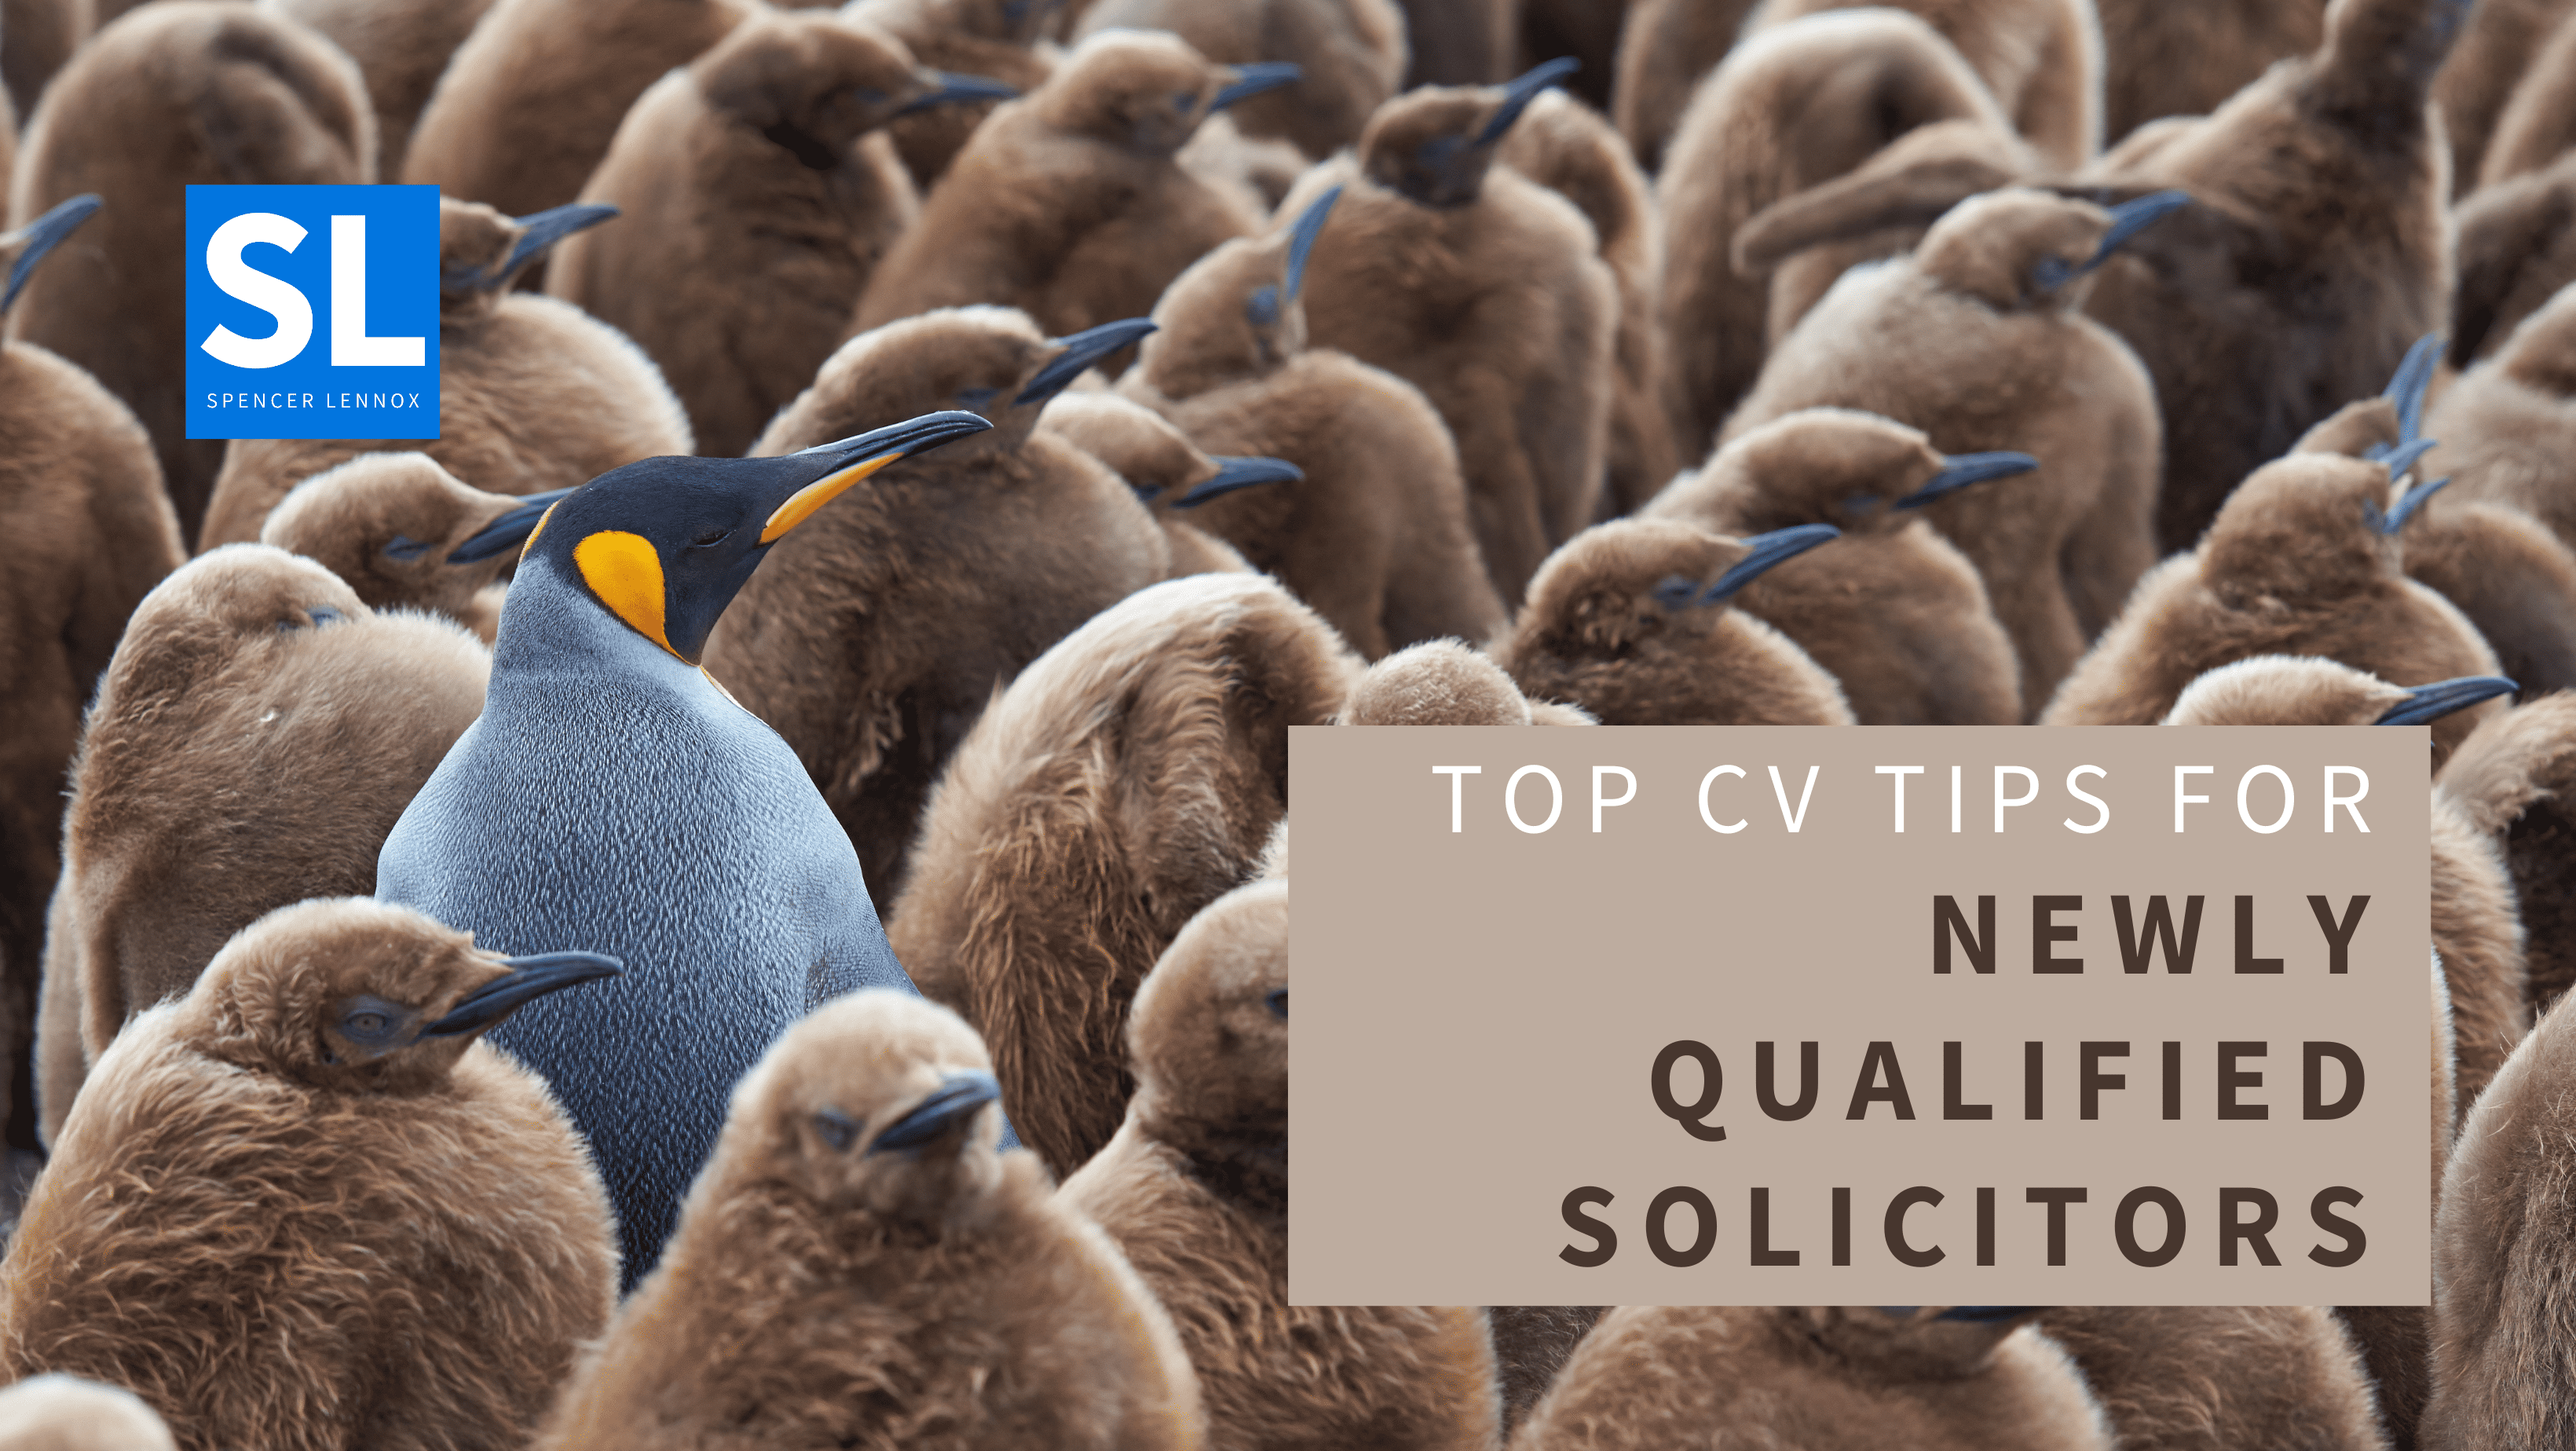 Top CV Tips for Newly Qualified Solicitors